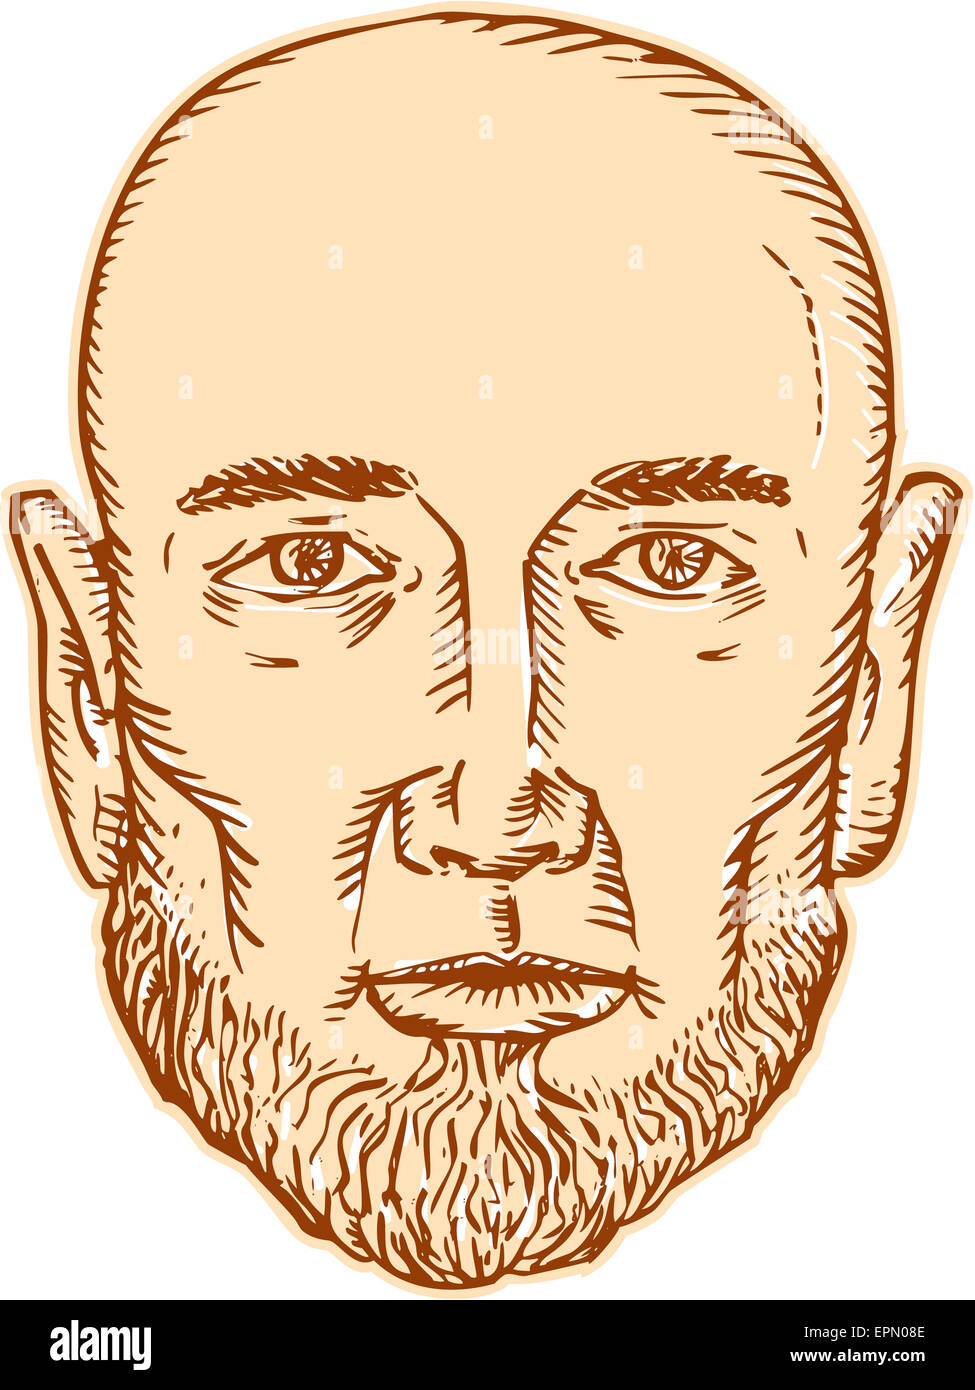 Etching engraving handmade style illustration of a bald head bearded male facing front set on isolated white background. Stock Photo